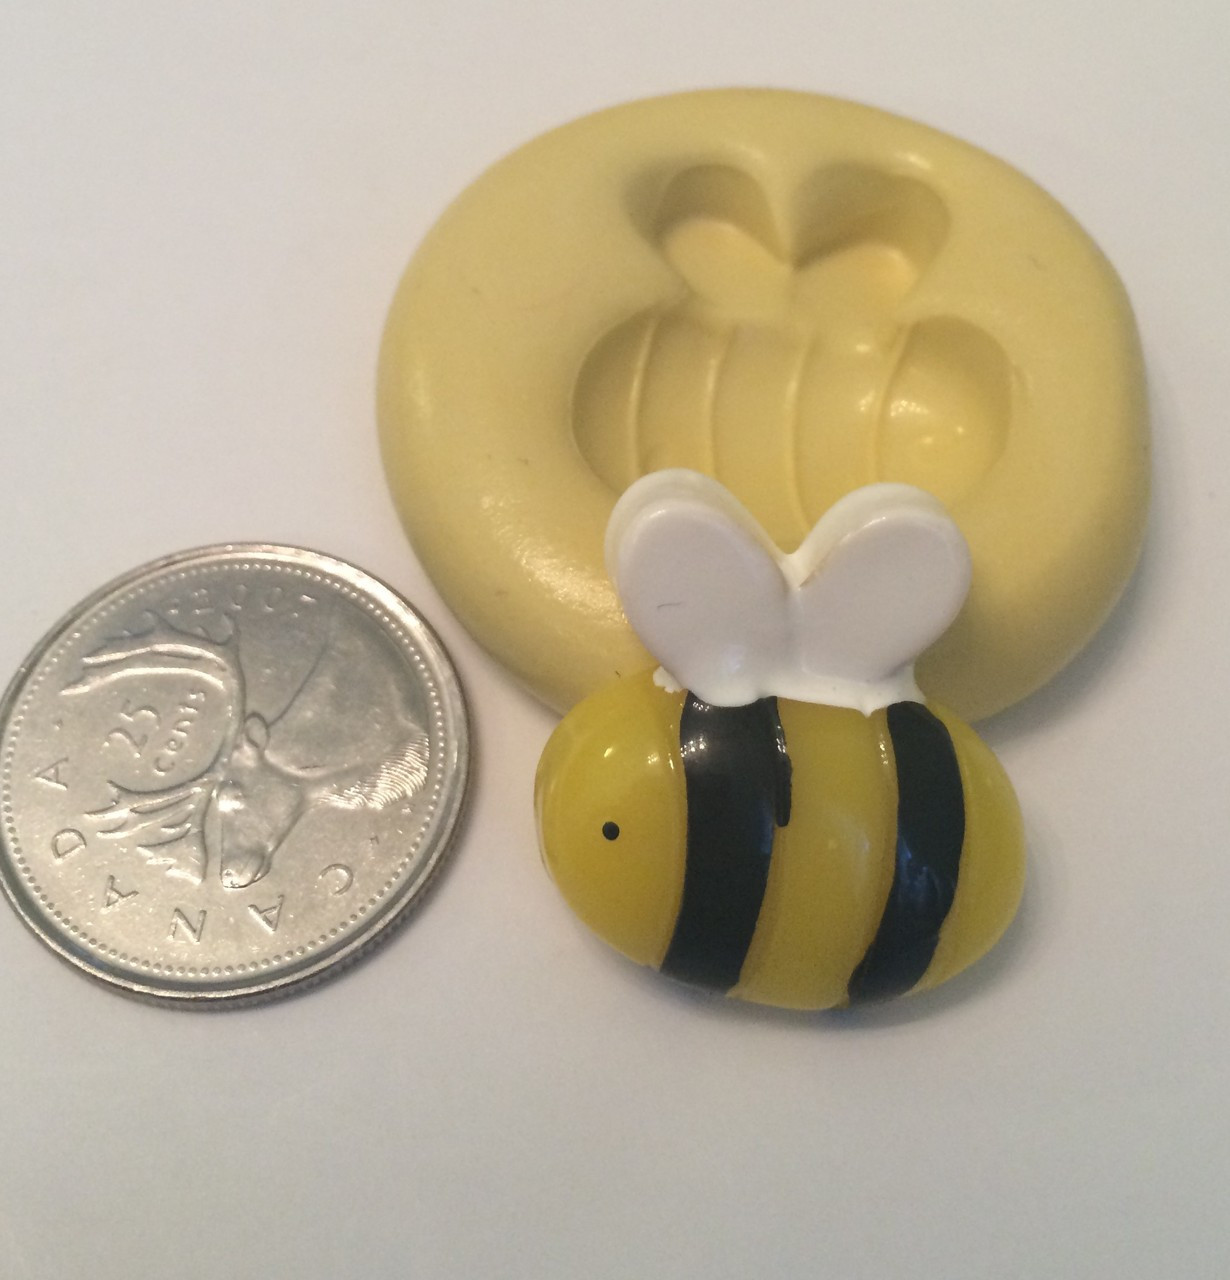 Bee Silicone Mold - Christines Molds